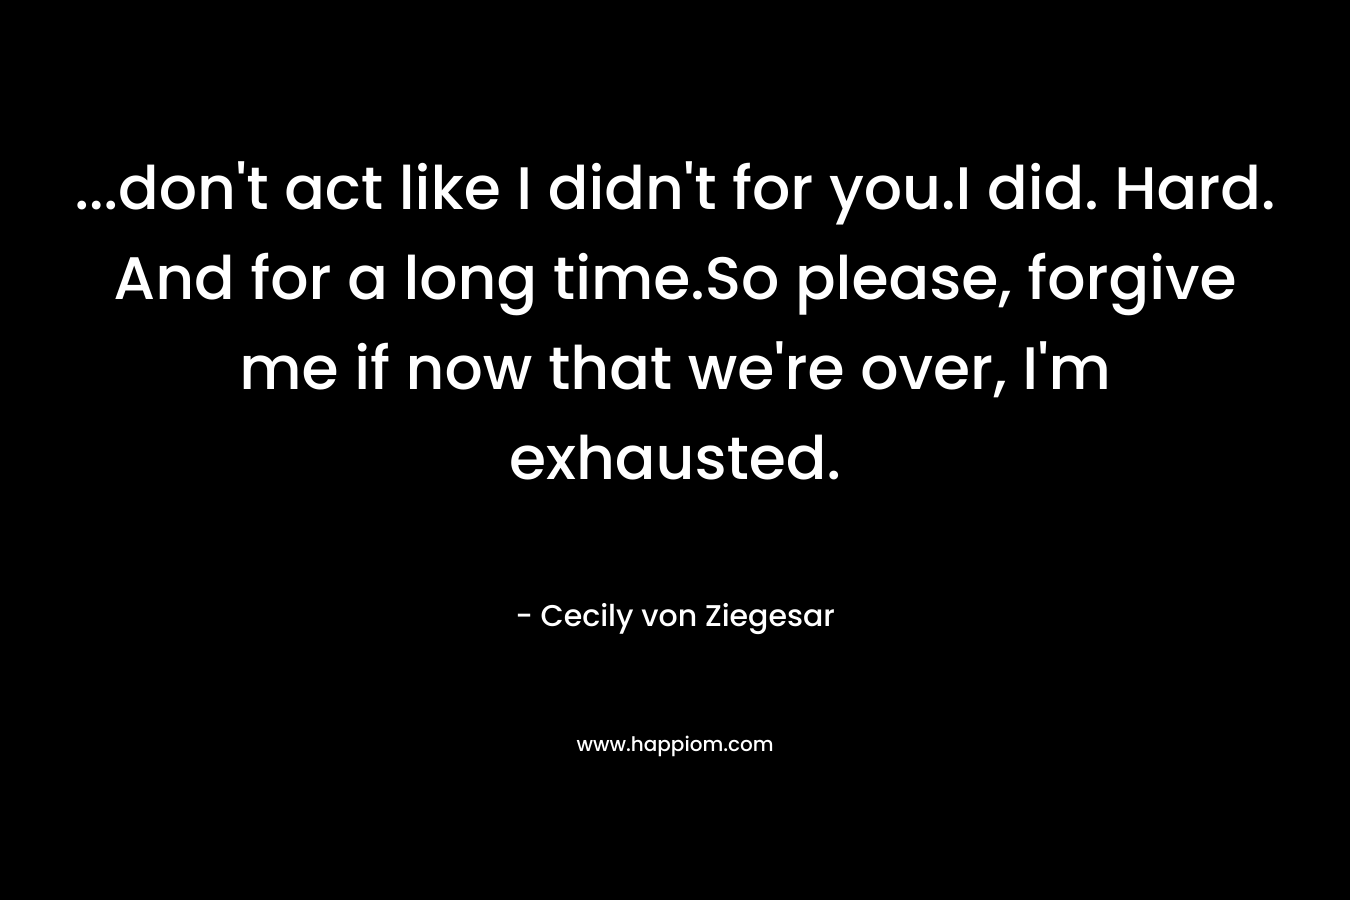 …don’t act like I didn’t for you.I did. Hard. And for a long time.So please, forgive me if now that we’re over, I’m exhausted. – Cecily von Ziegesar